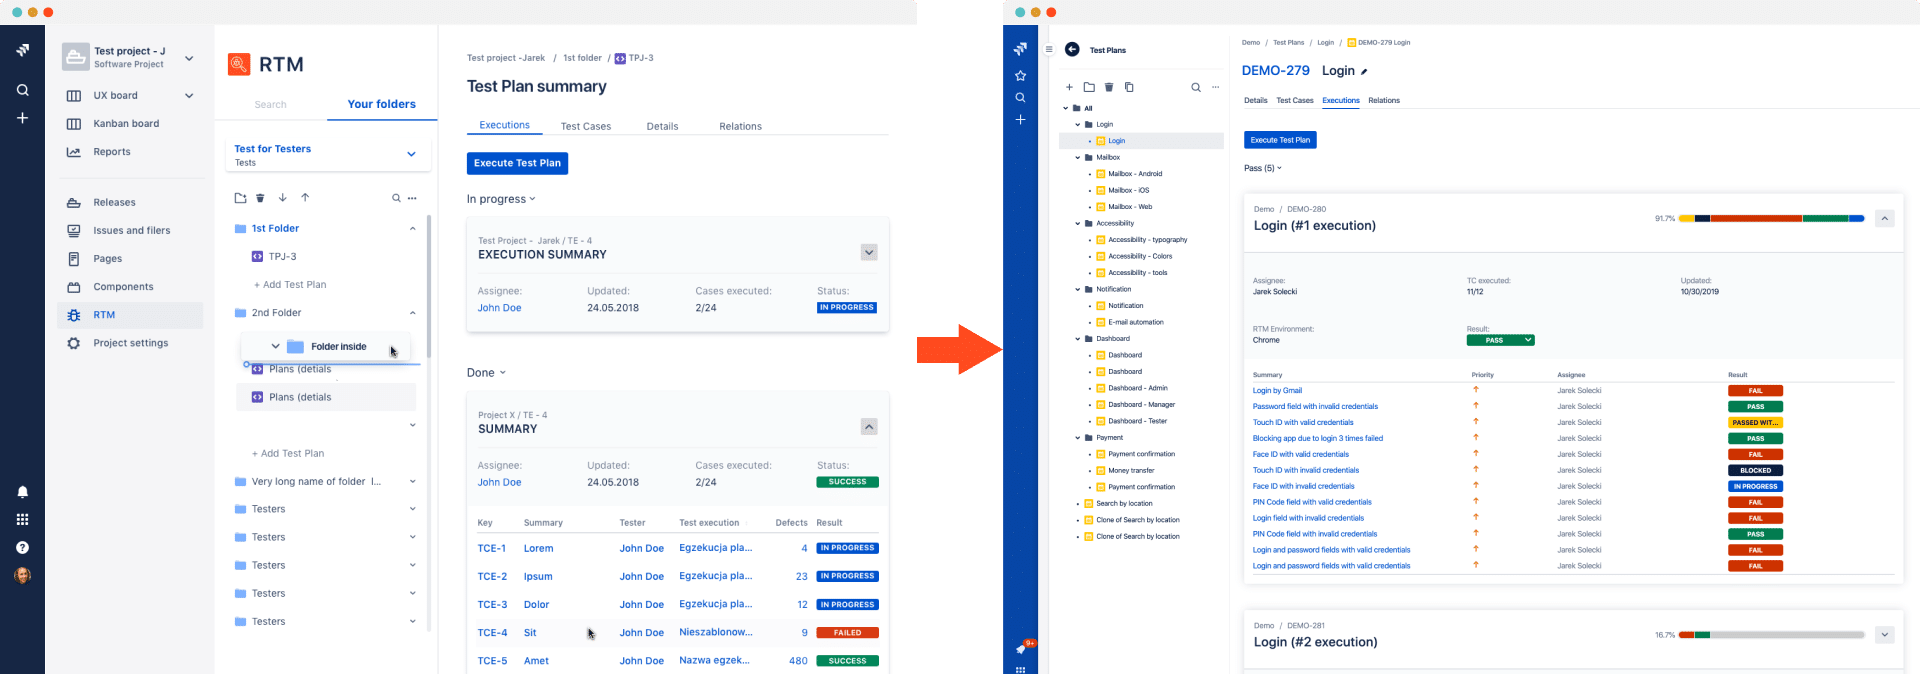 Requirements and Test Management for Jira screen view